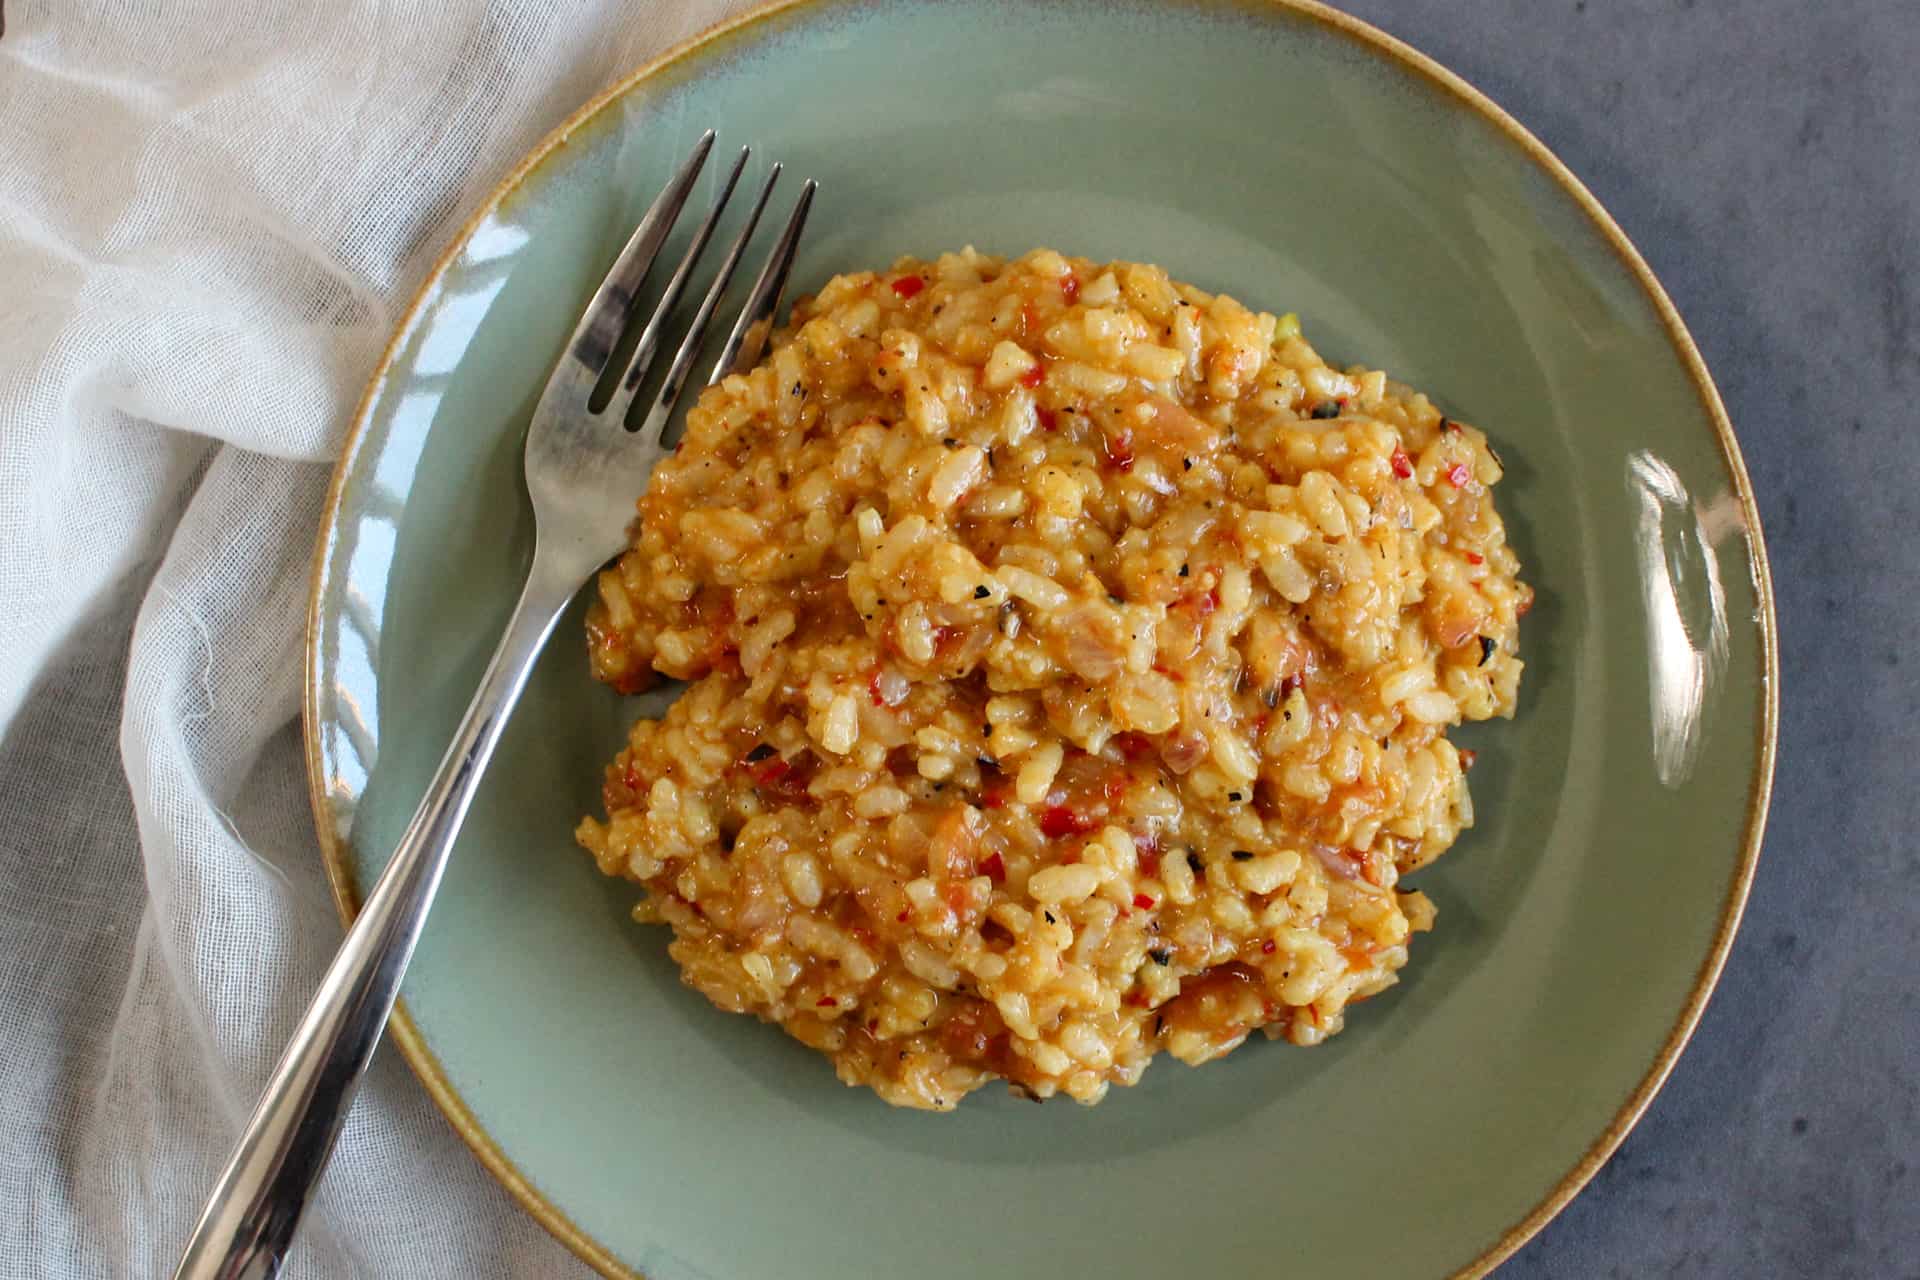 A spicy roasted vegetable risotto on a plate